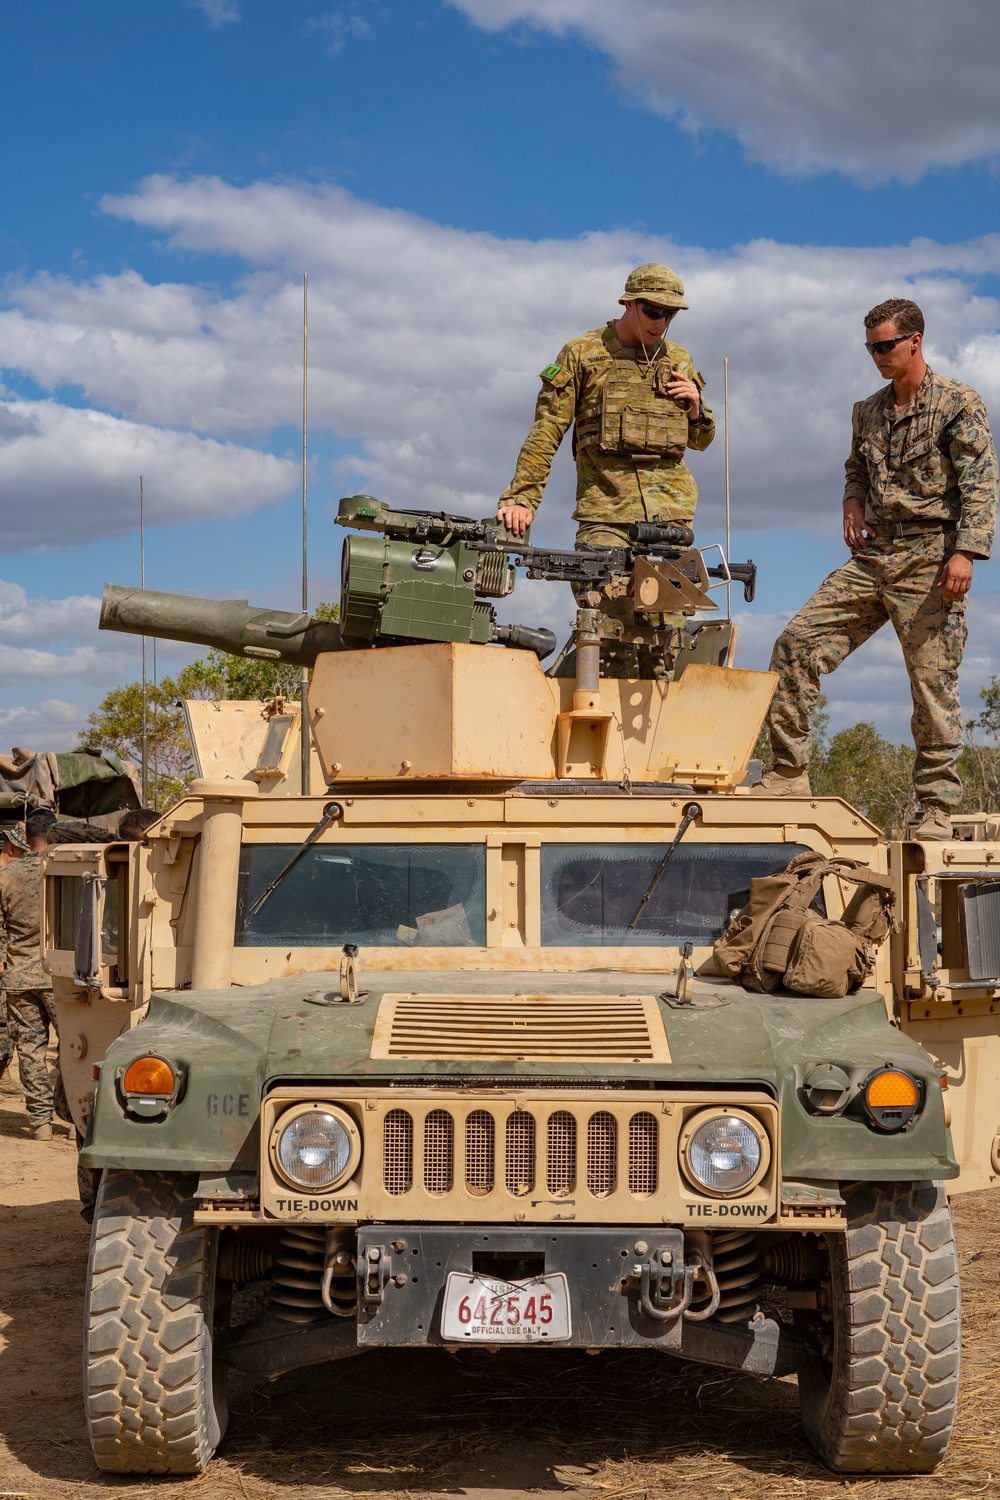 Marines share weapons capabilities with ADF